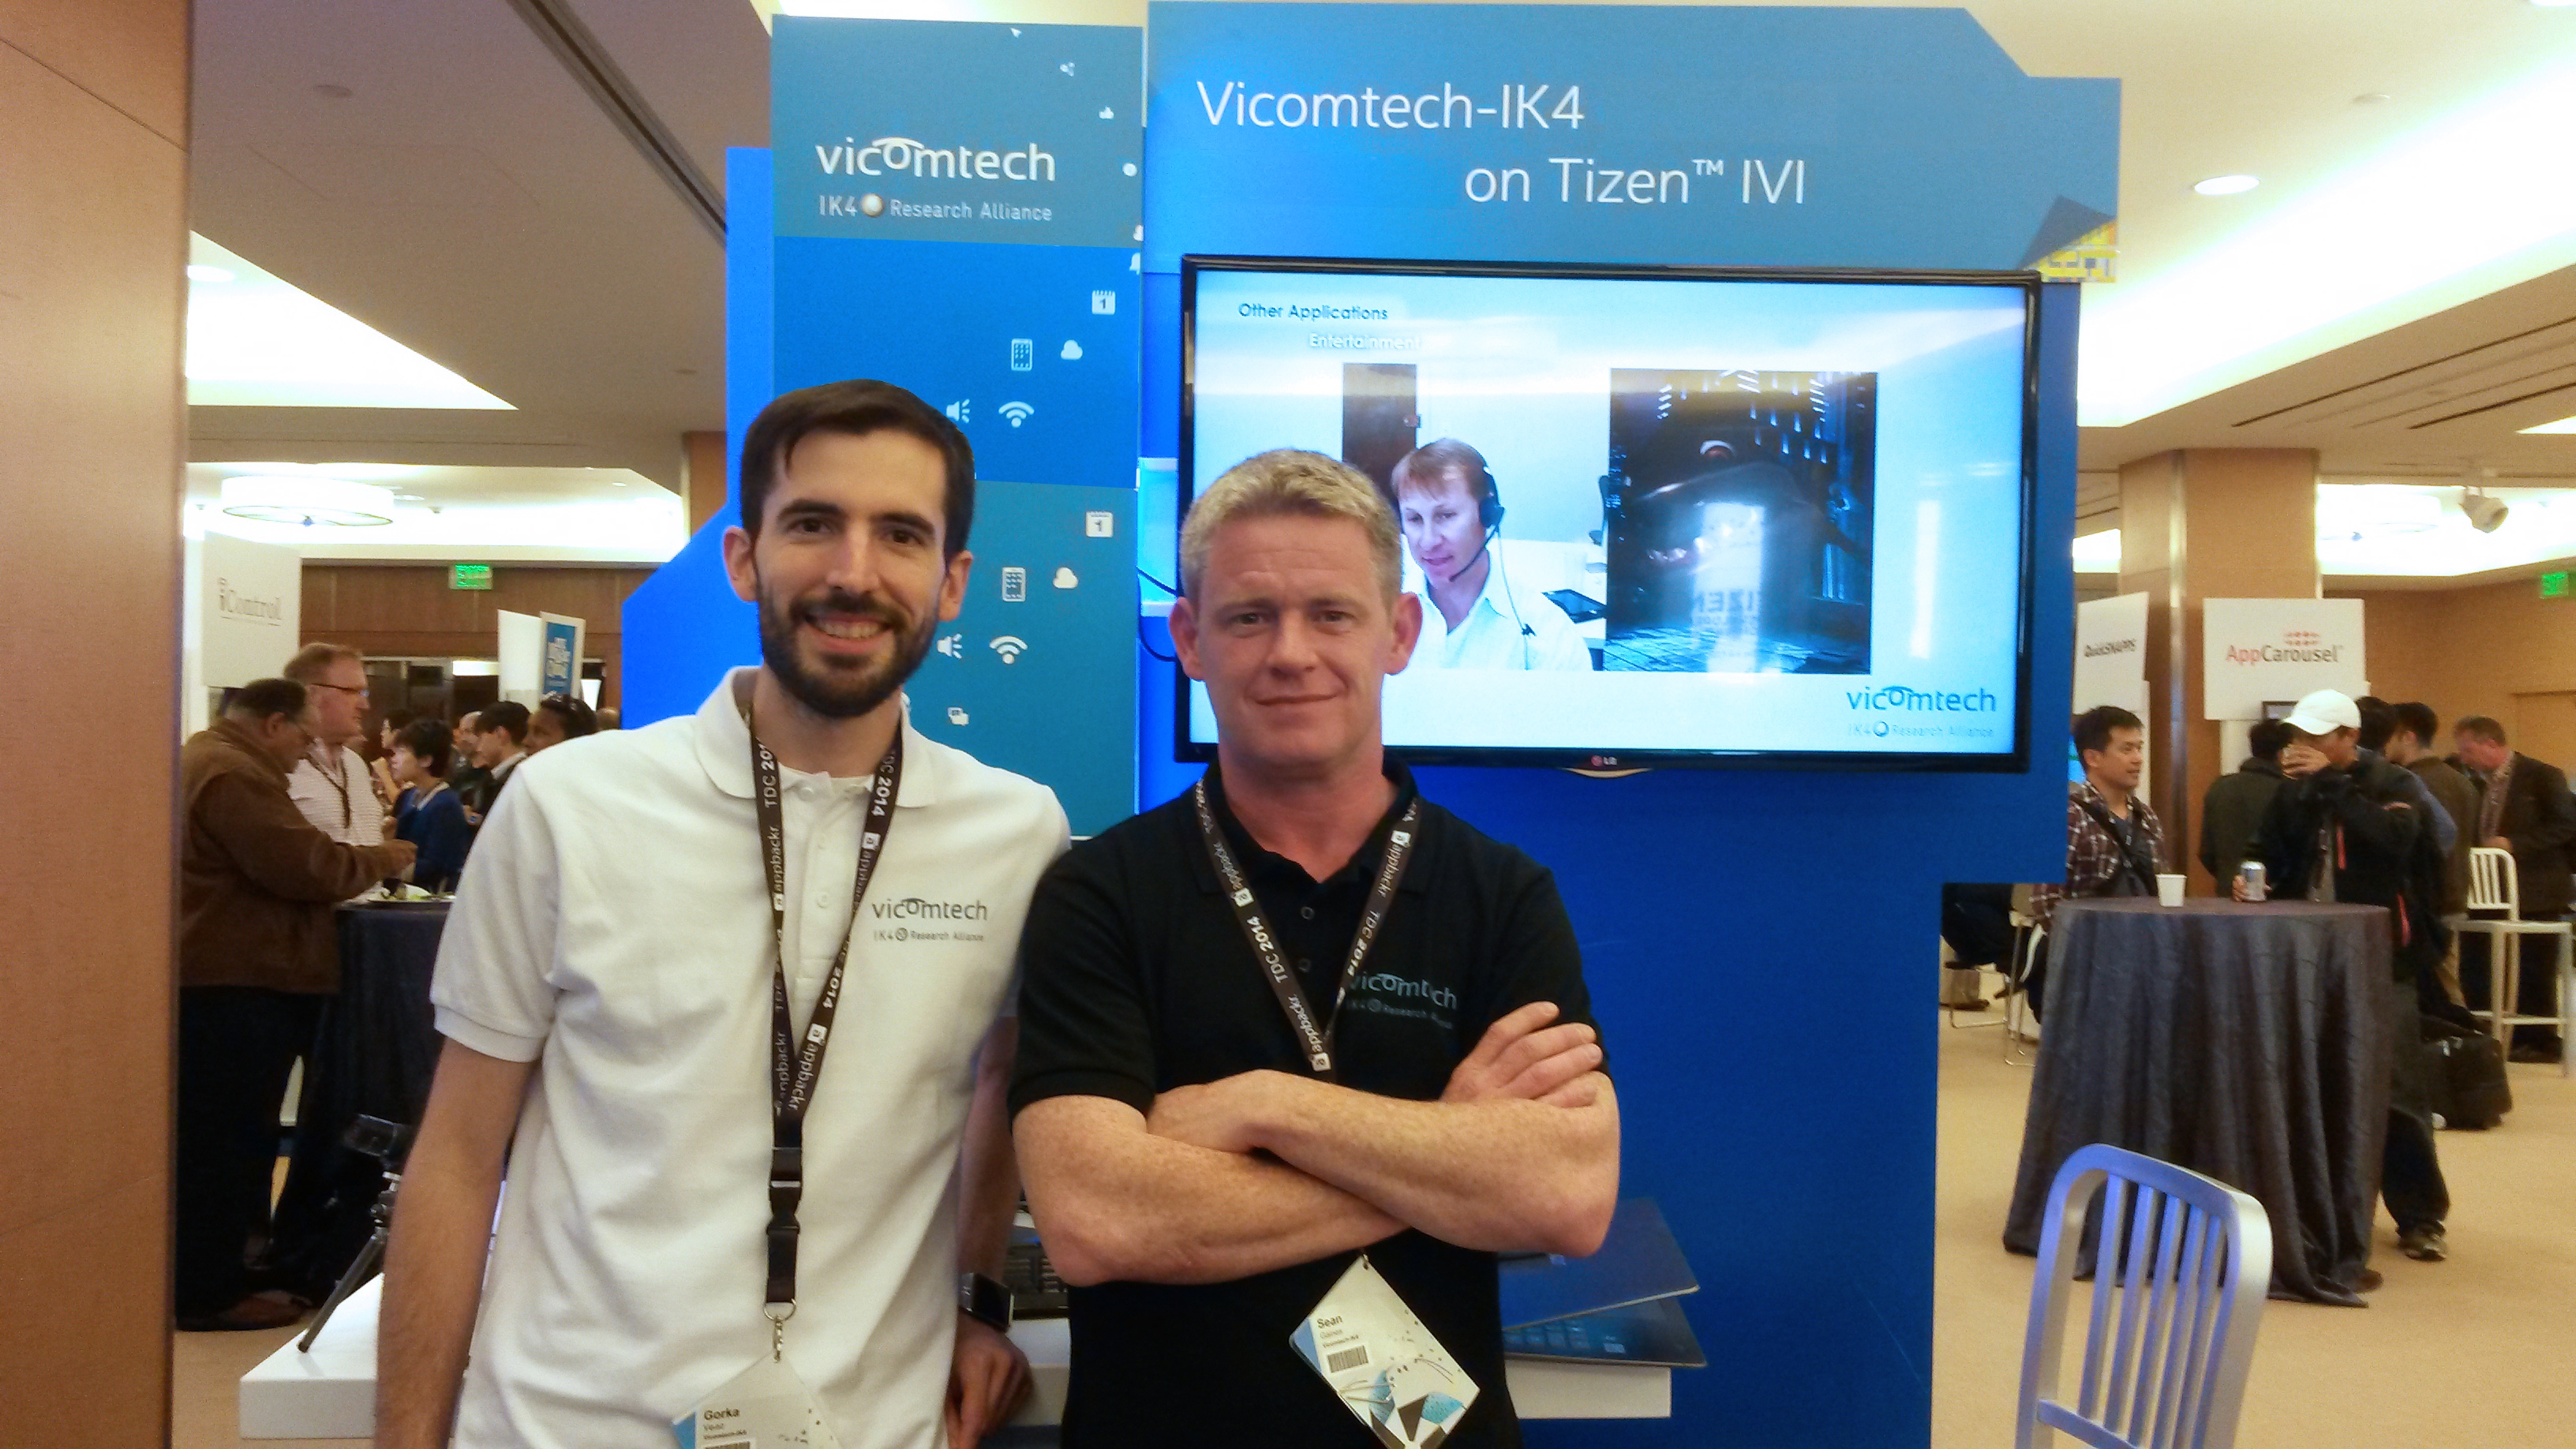 VIULIB was presented at the Intel booth during the TIZEN Developer Conference